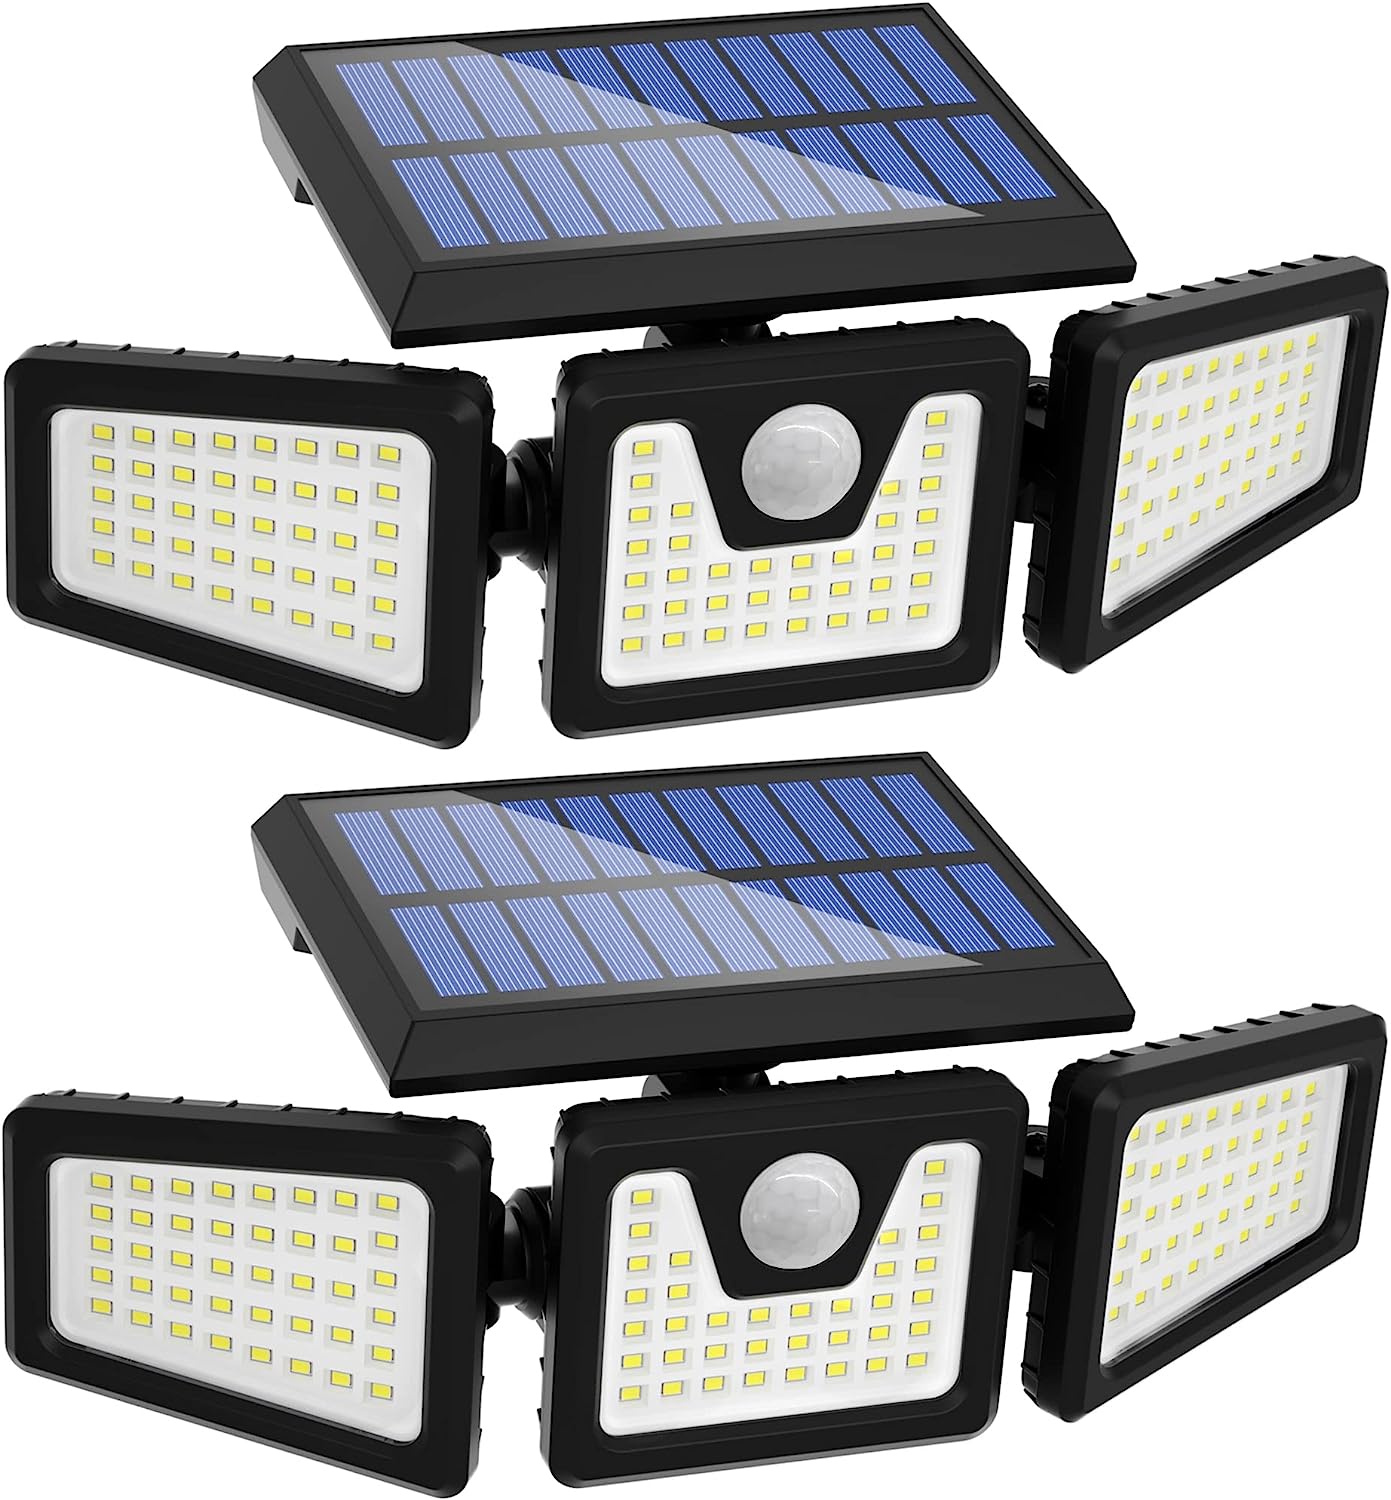 INCX Solar Outdoor Lights with Motion Sensor, 3 Heads [...]